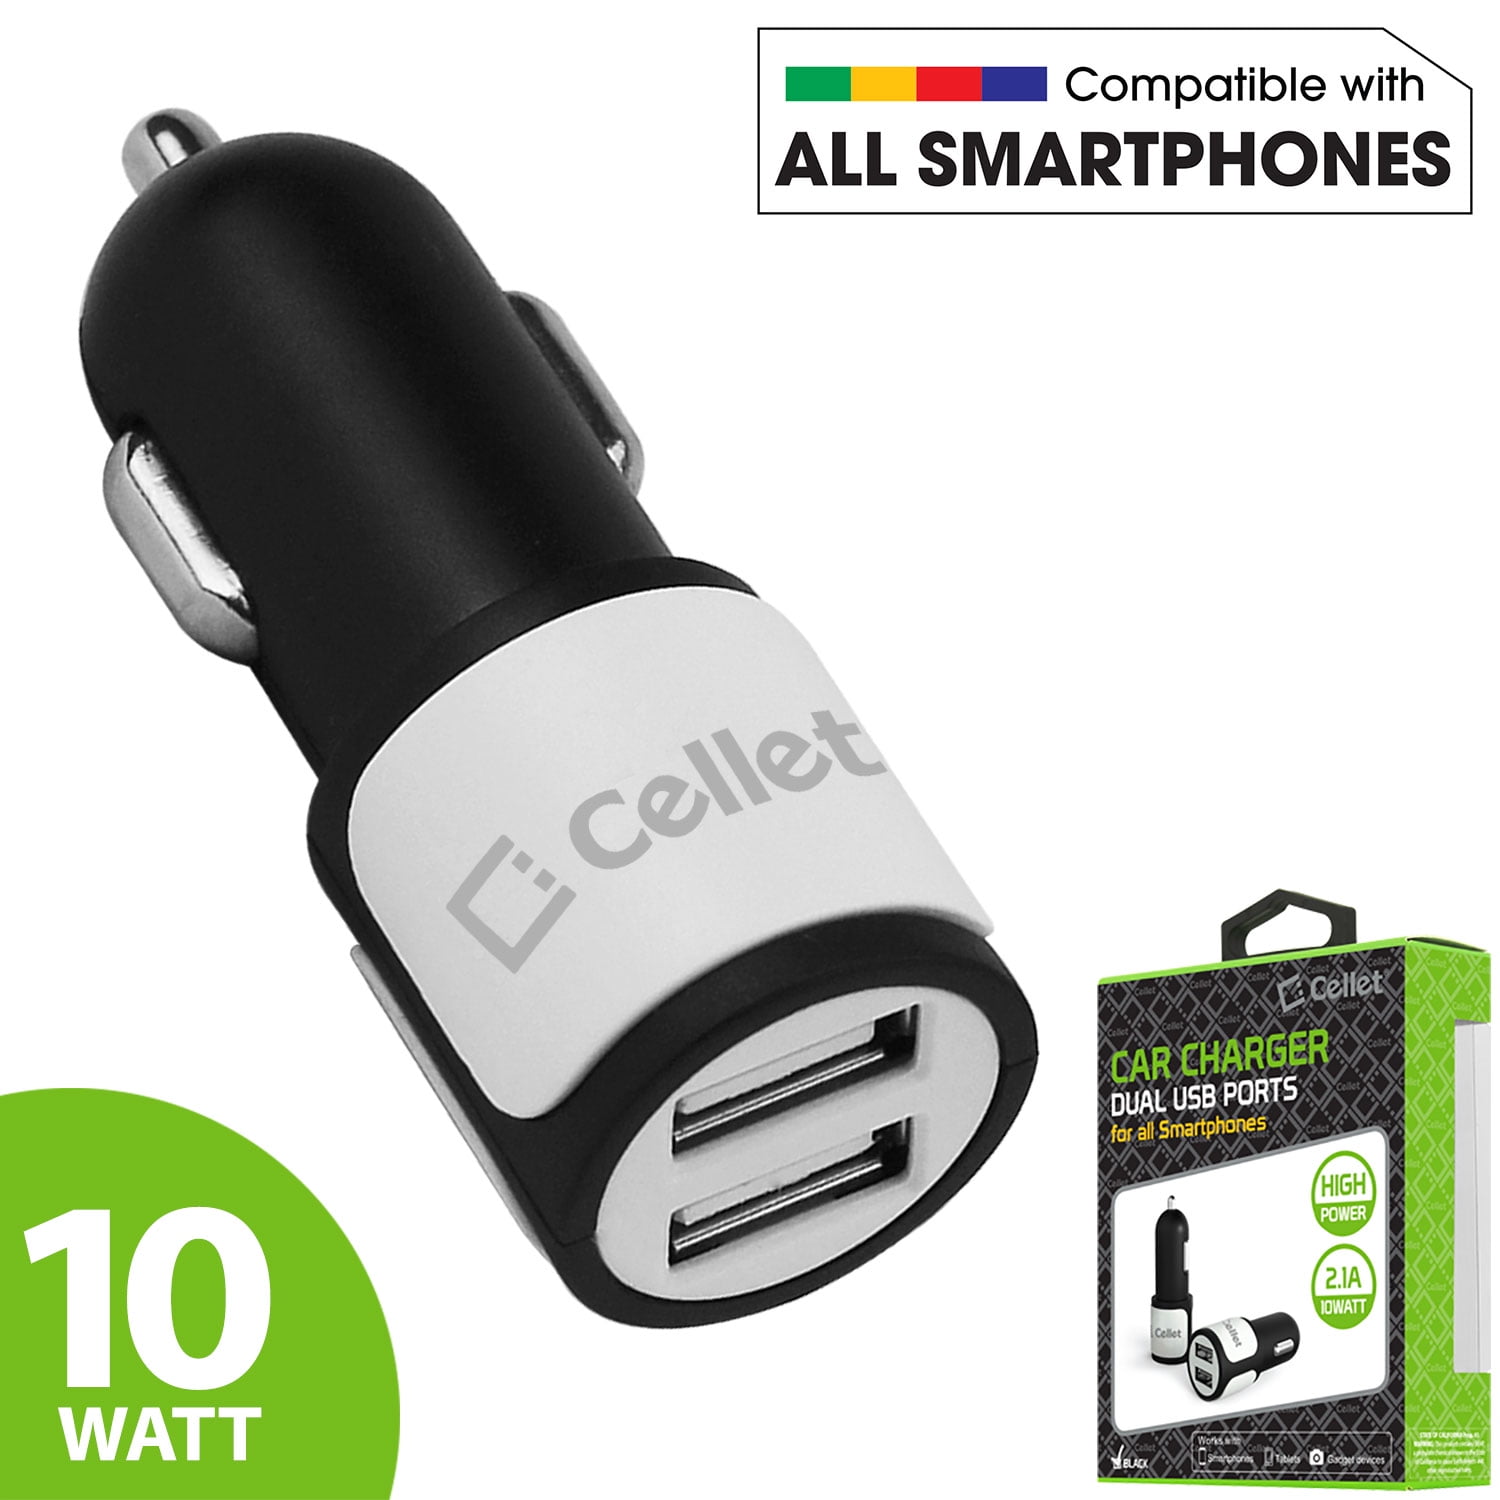 Wholesale OFFER Universal 12V USB Car Chargers x 100 20% OFF 